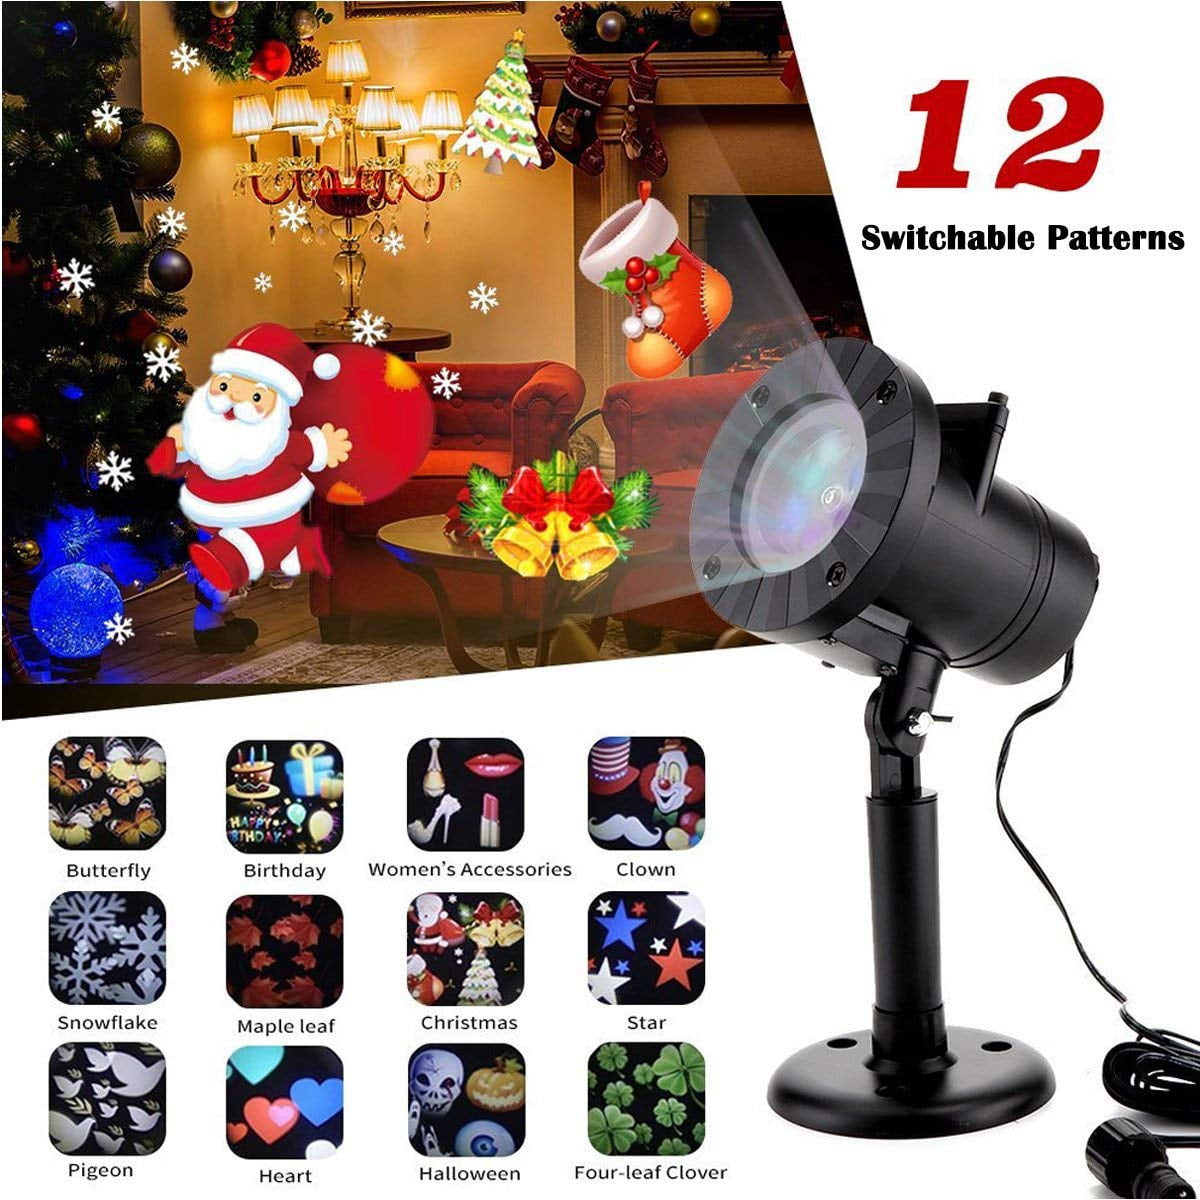 QIANGUANG Christmas Projector Lights,20 Patterns Rotating LED Projector Spotlight,Waterproof Landscape Light Disco,Club,Party,Birthdays,Valentine’s Day,Wedding,Garden Wall Stage Events Indoor Outdoor 